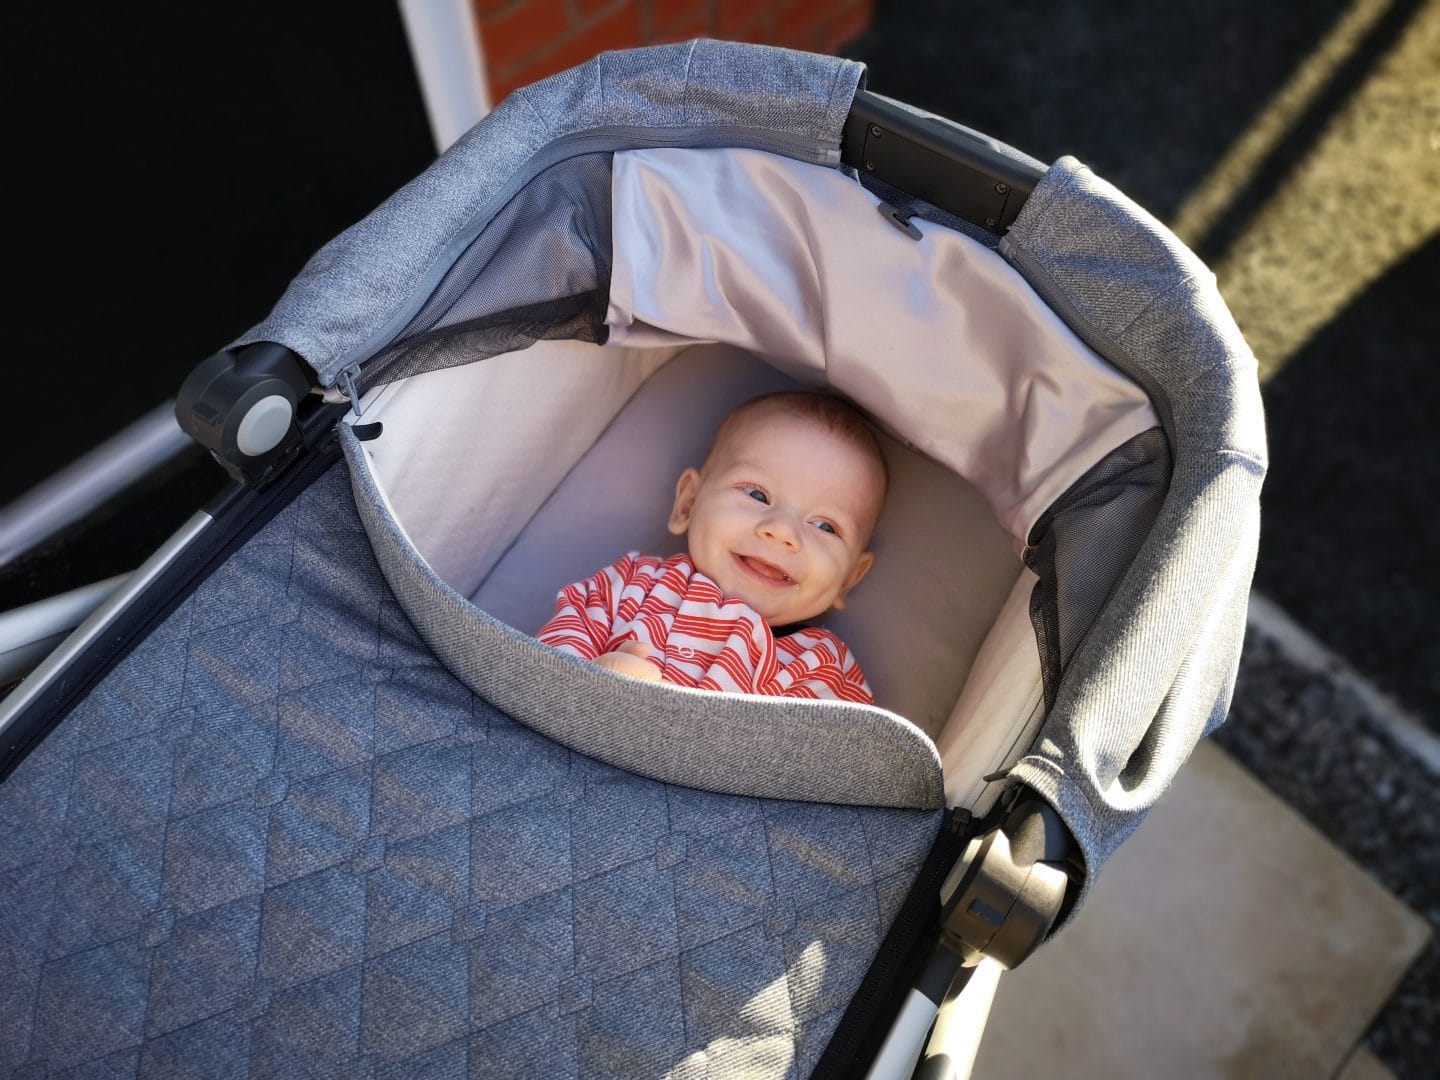 uppababy carrycot